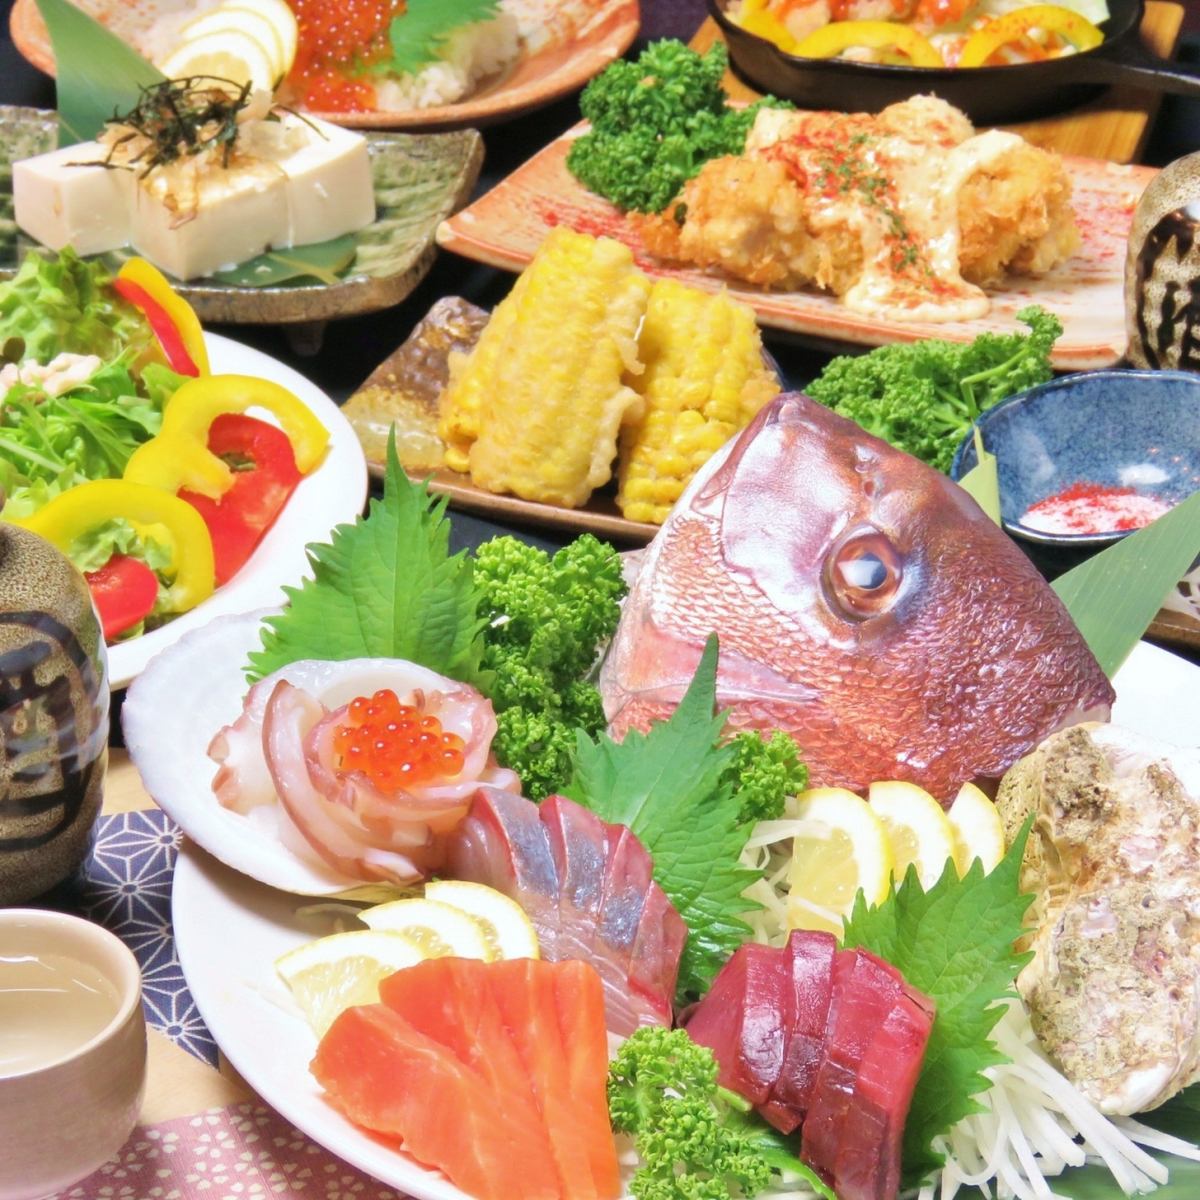 Courses with all-you-can-drink start from 4,000 yen! Suitable for various parties!